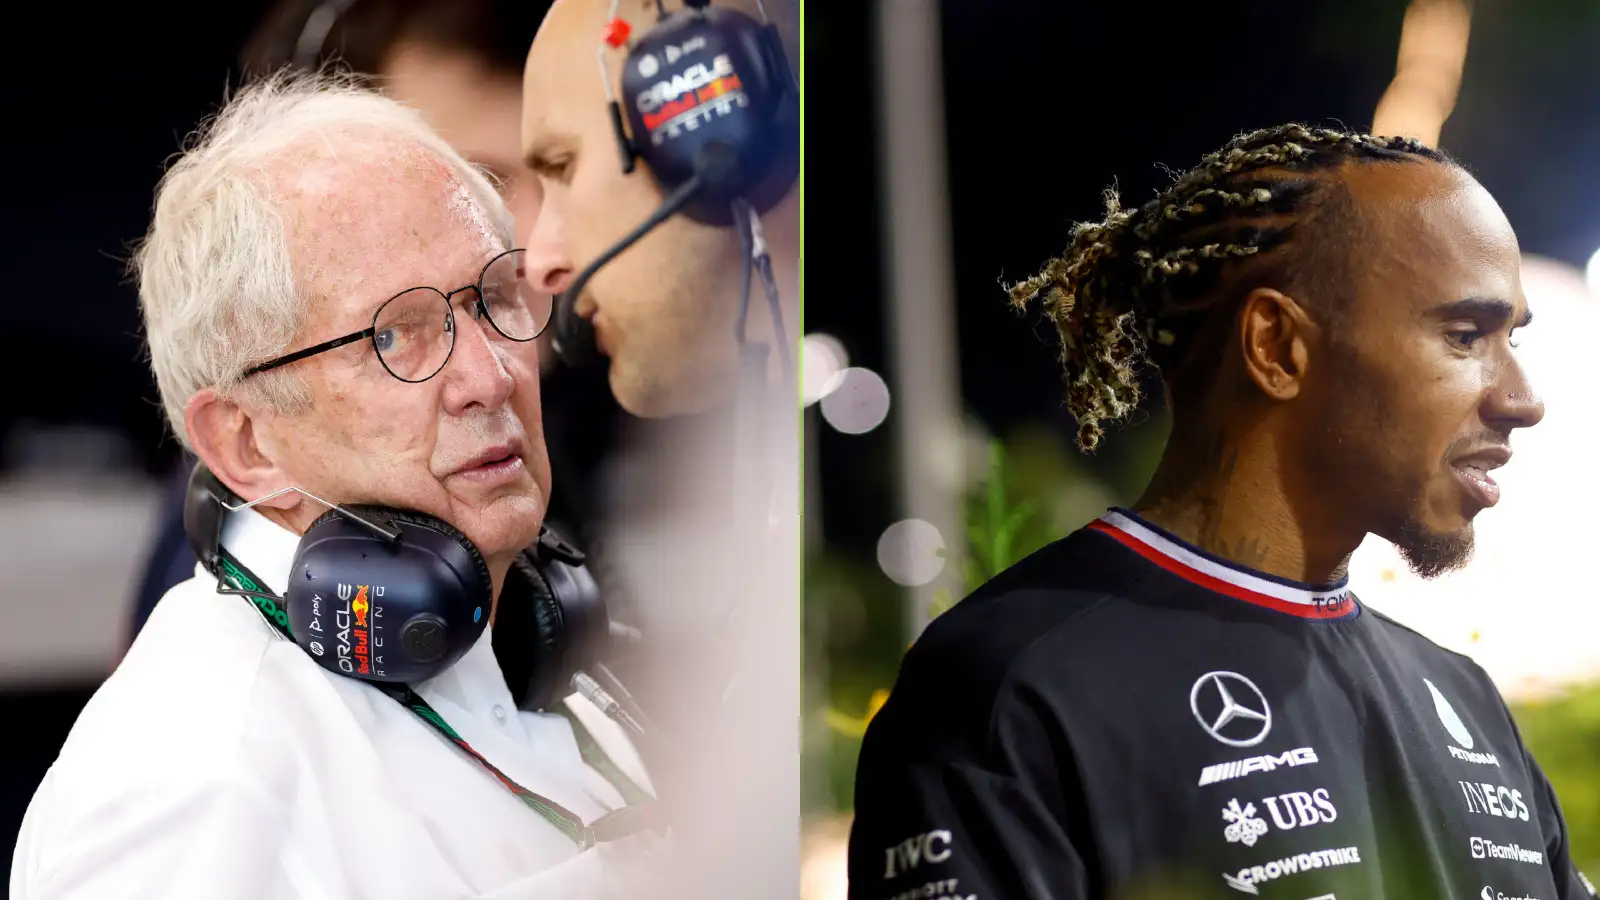 Red Bull's Helmut Marko and Mercedes' Lewis Hamilton pictured over the Singapore GP weekend.